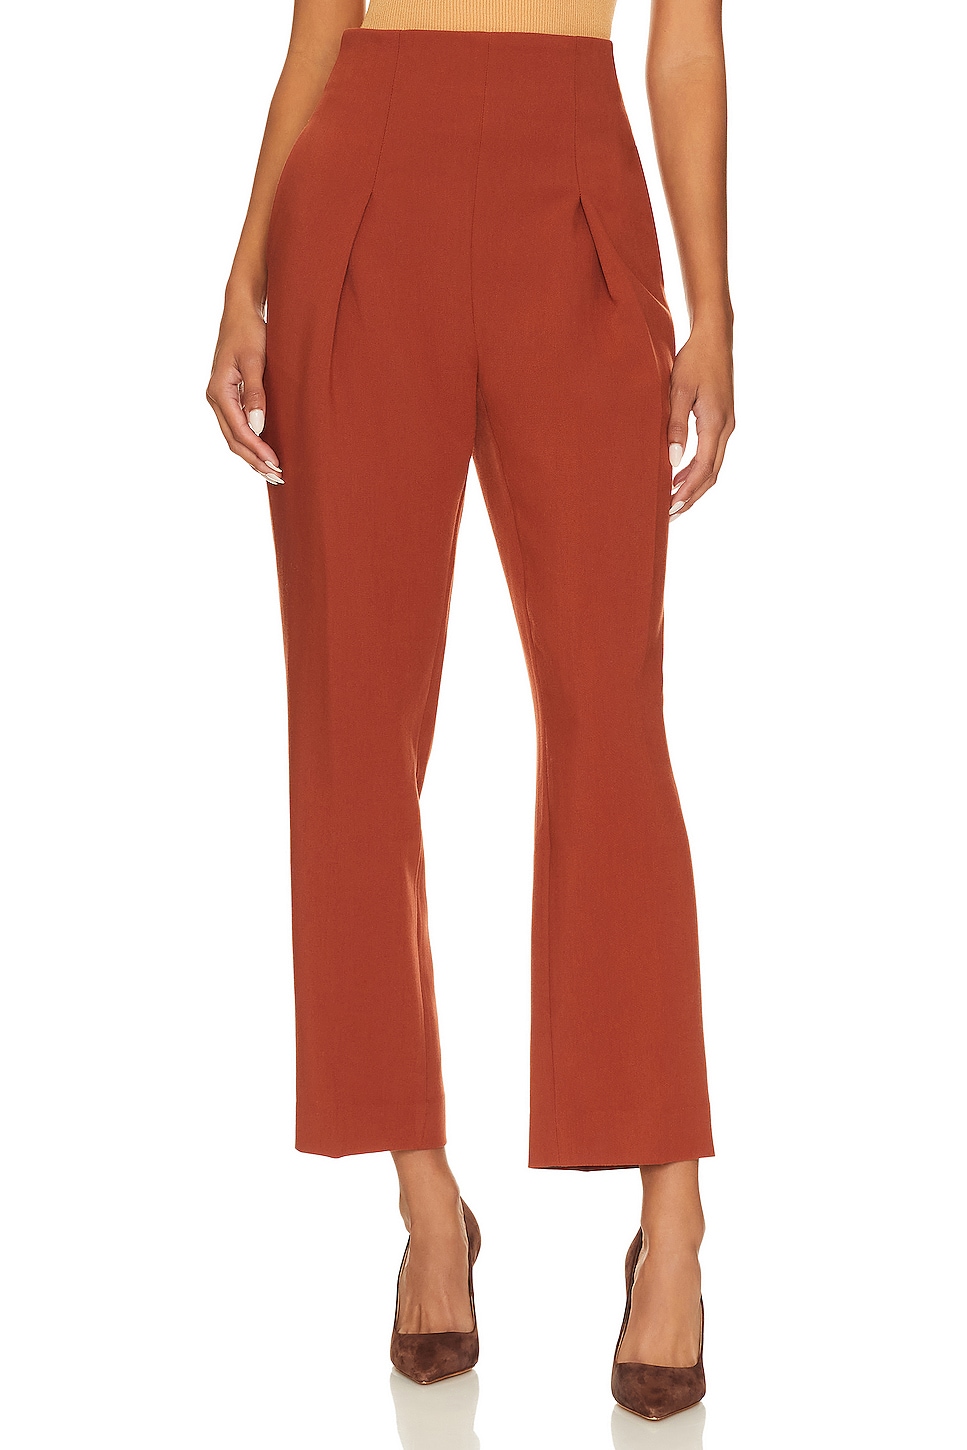 1. STATE High Waisted Pleated Carrot Pant in Roasted Russett